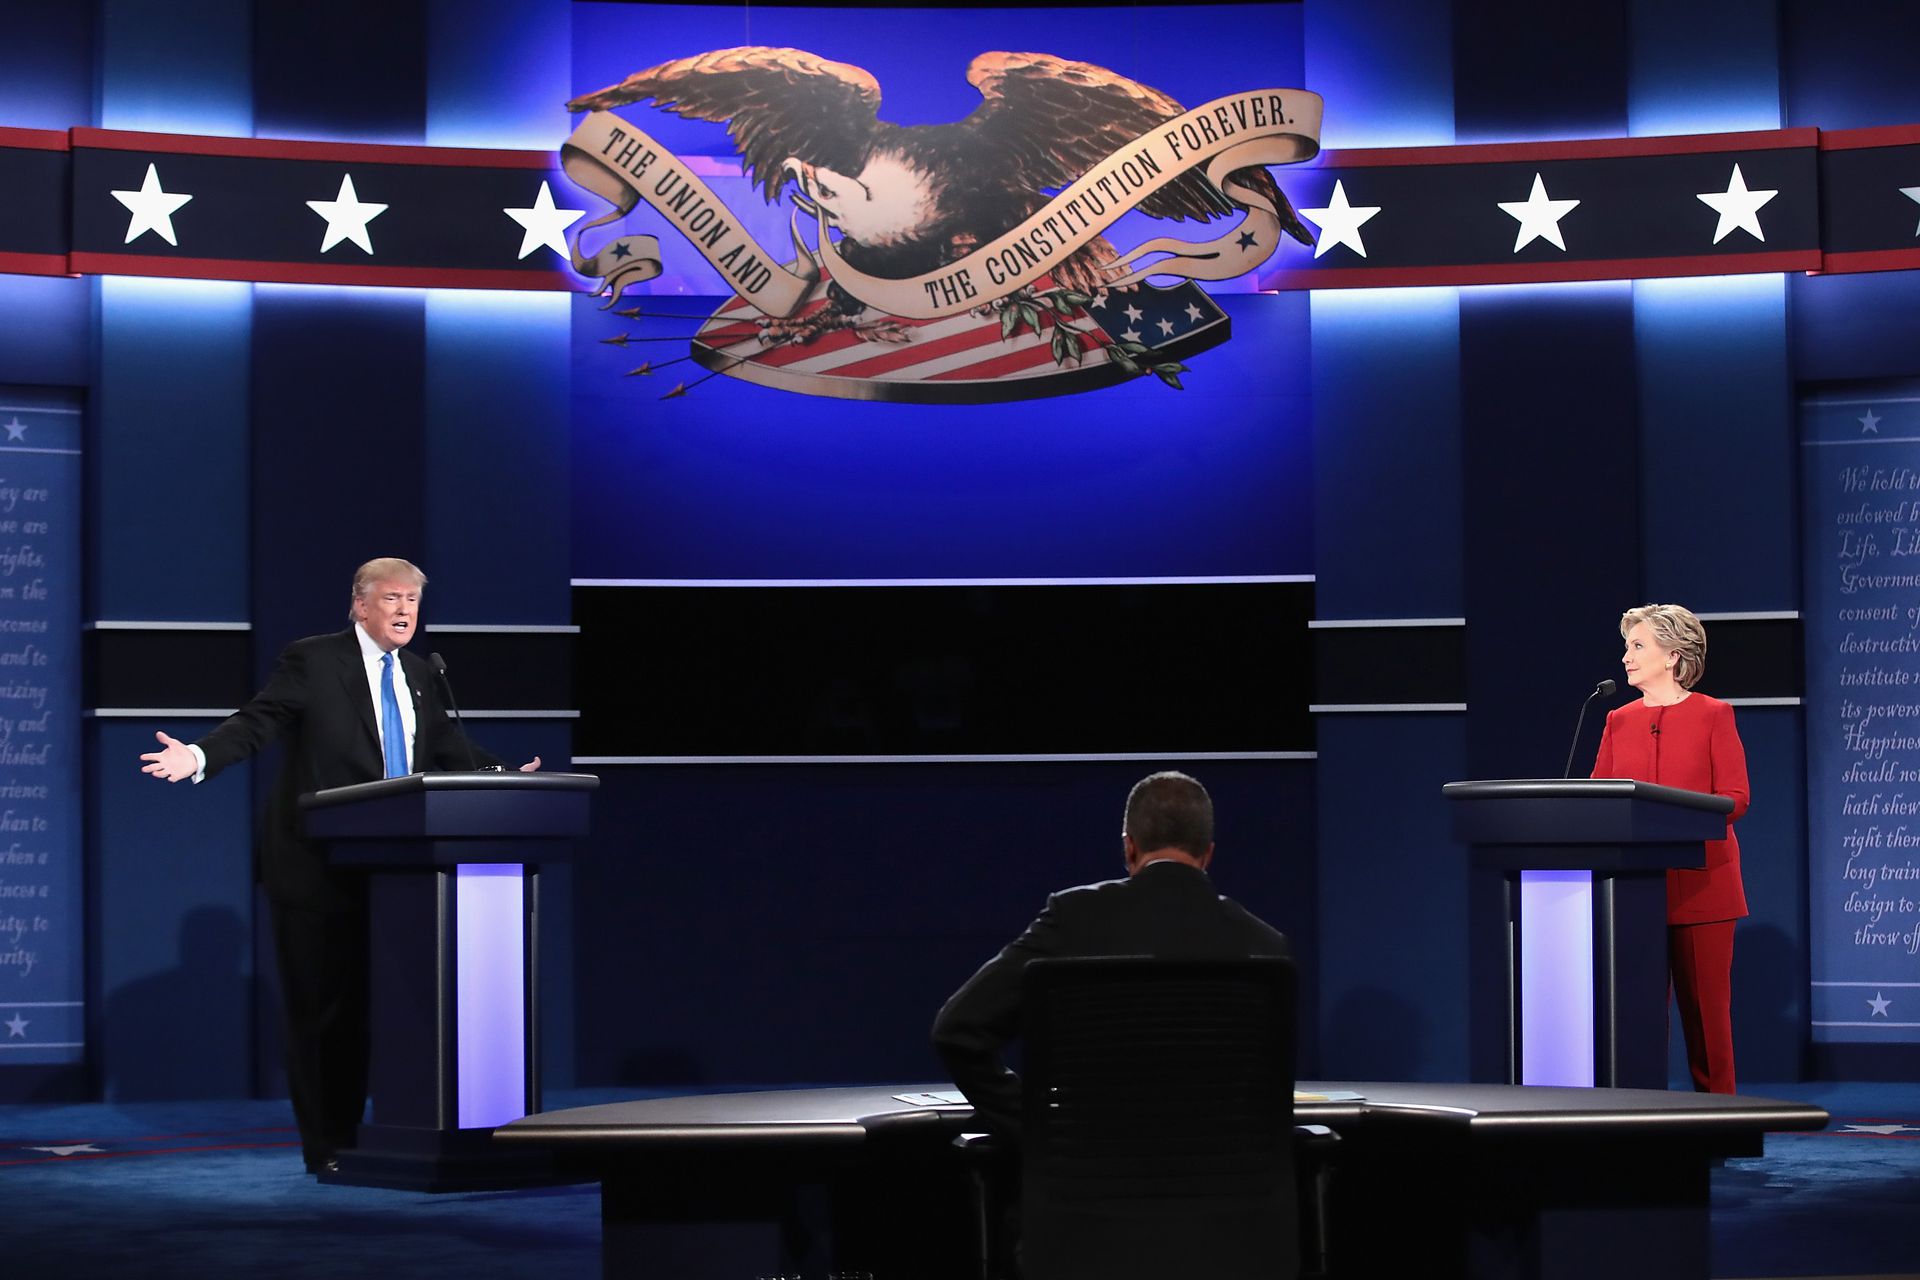 You can vote online for potential presidential debate questions The Verge